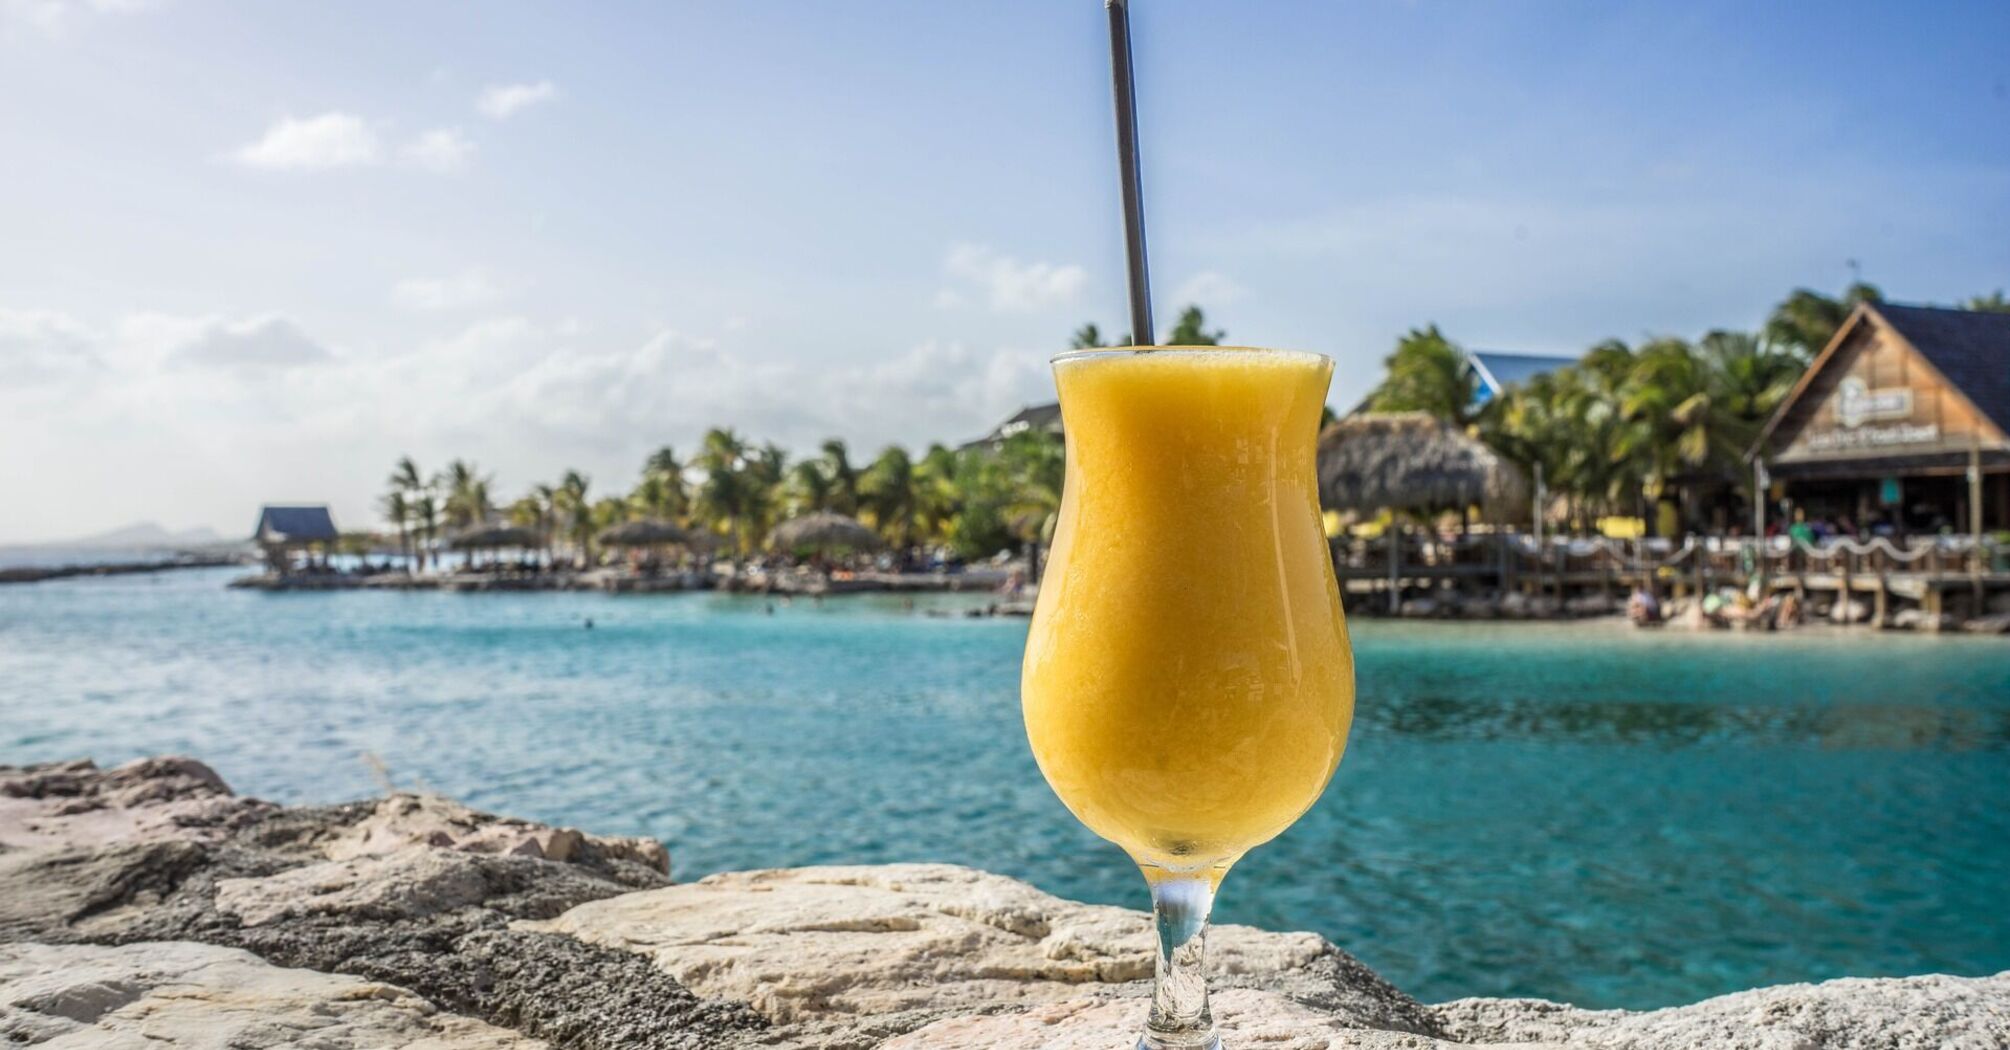 A passion fruit daiquiri in a tall glass with a straw, set on a rock with a blurred tropical beach resort background in Curacao